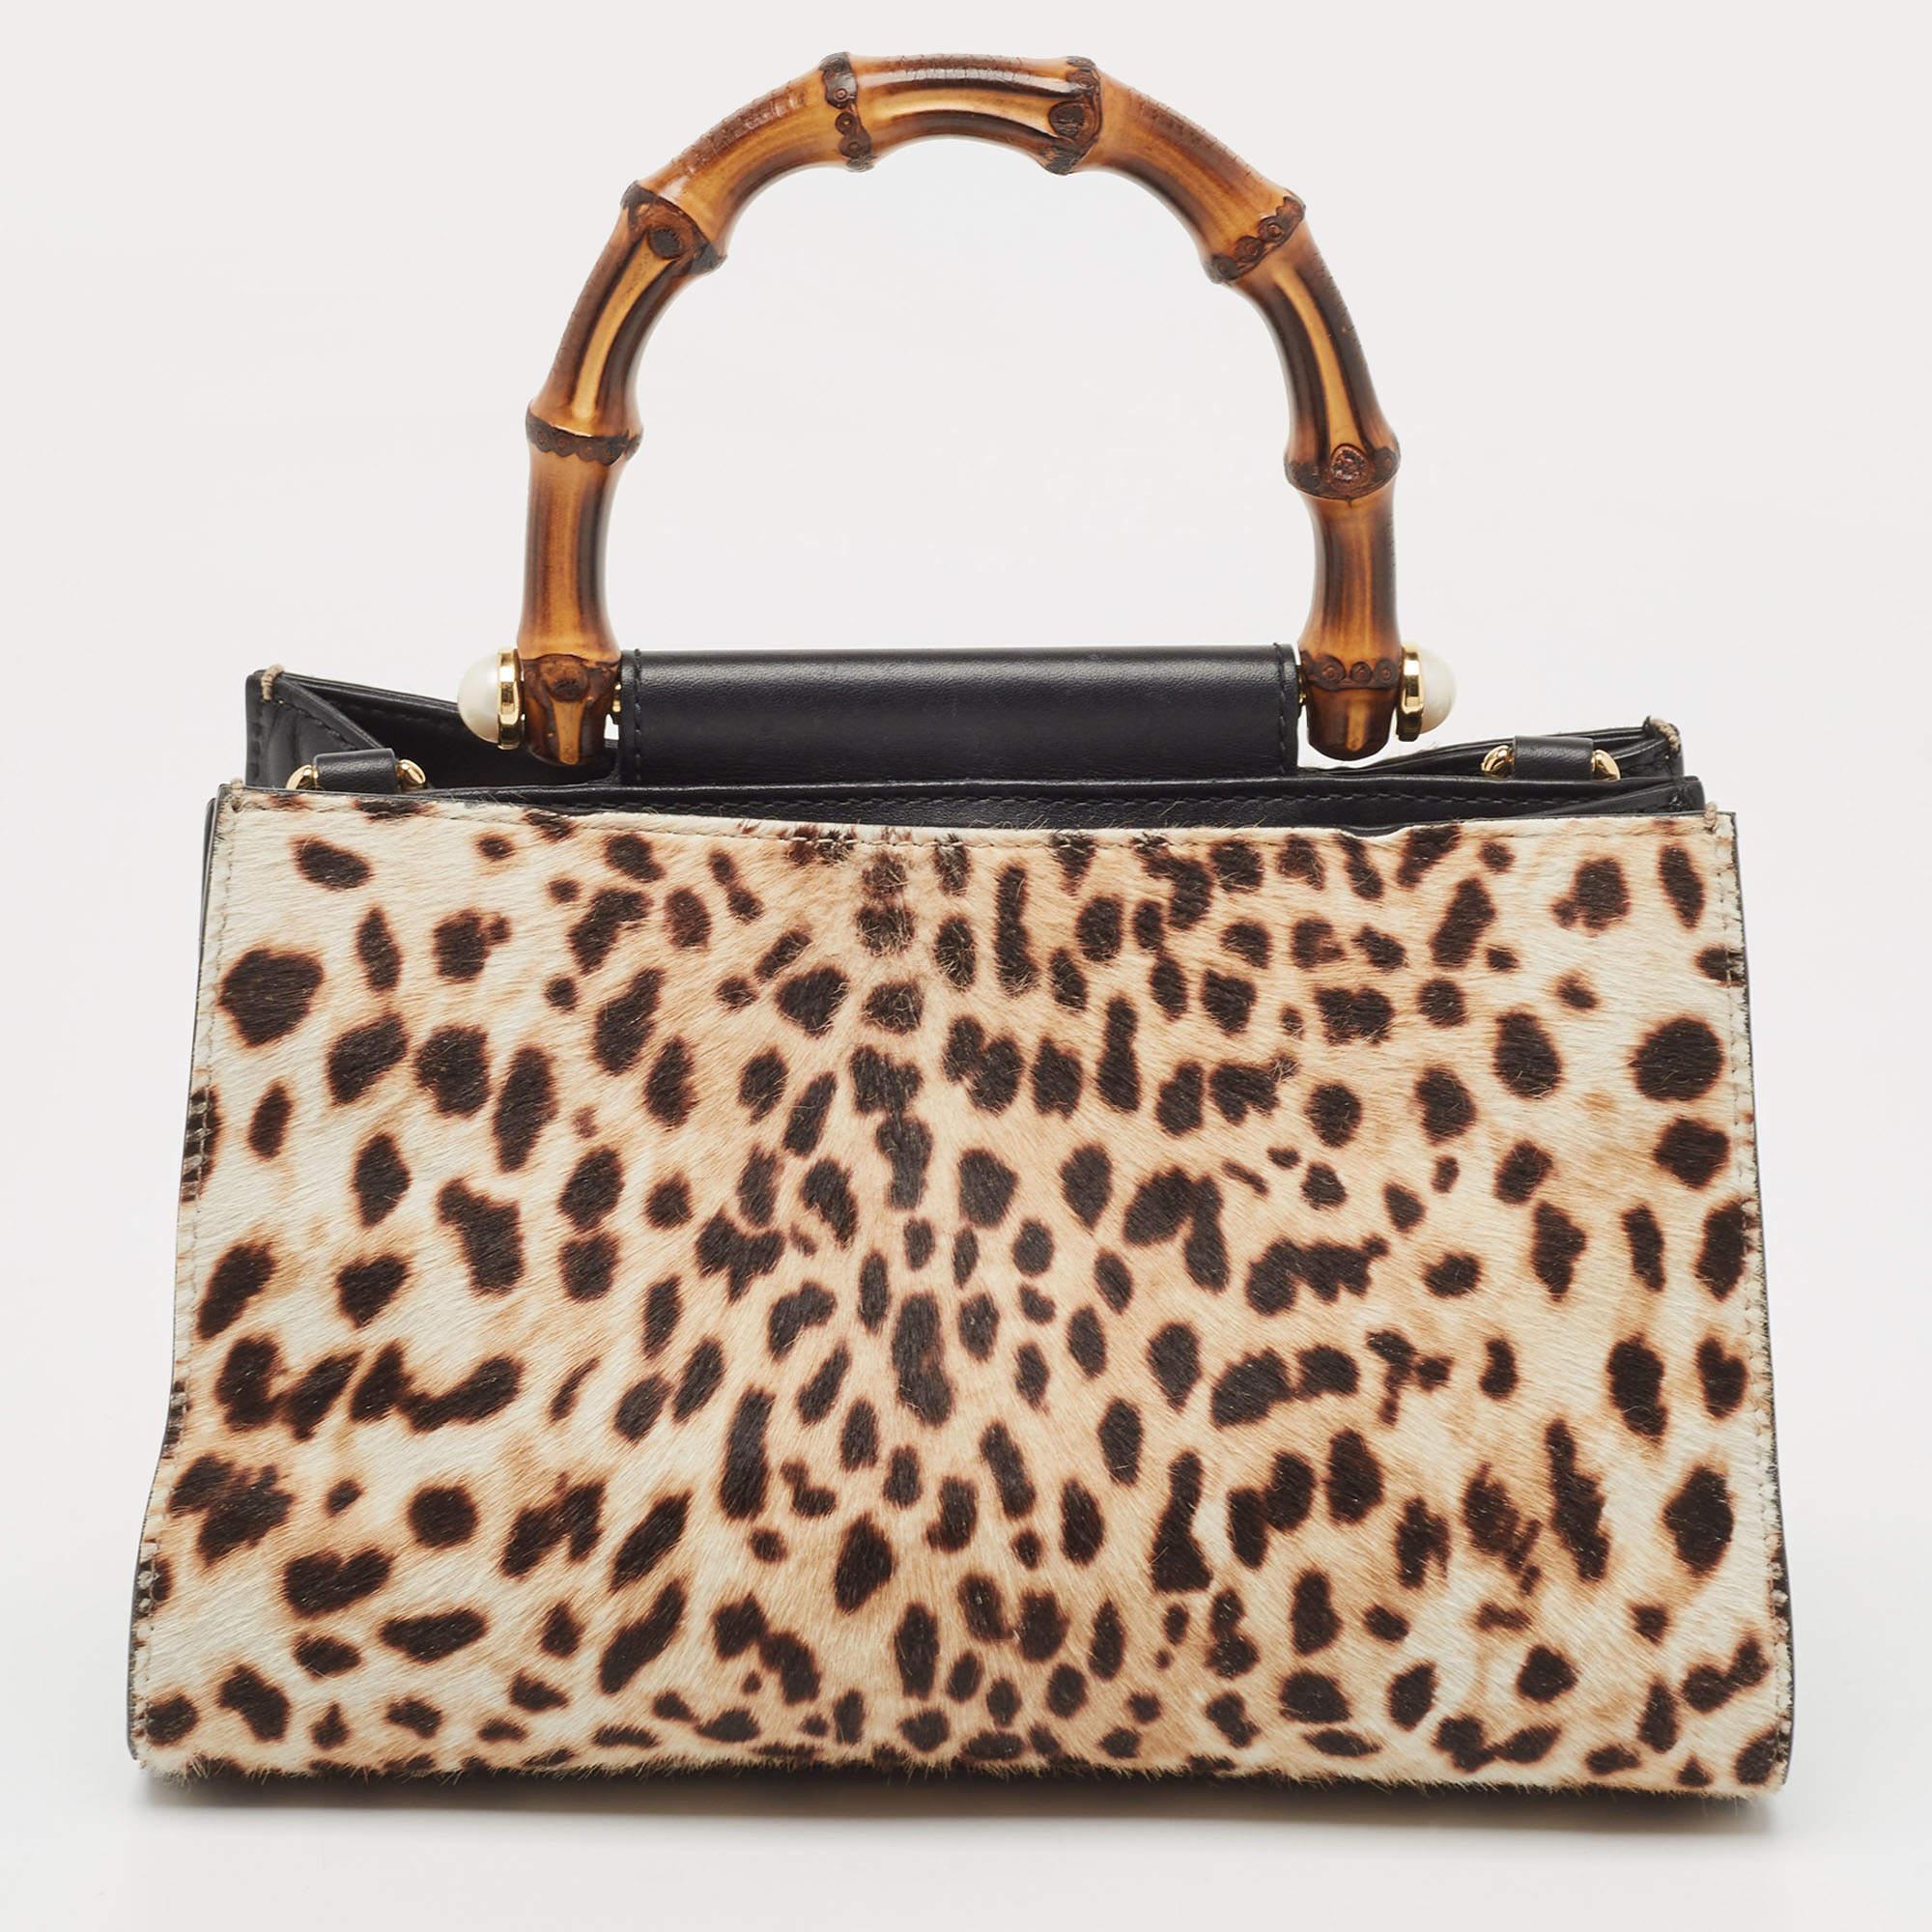 This Gucci Nymphaea bag is characterized by recognizable bamboo handles and an elegant silhouette. Crafted in smooth, black leather and leopard-printed calfhair, this bag boasts a spacious interior lined with suede. A stunning creation you deserve